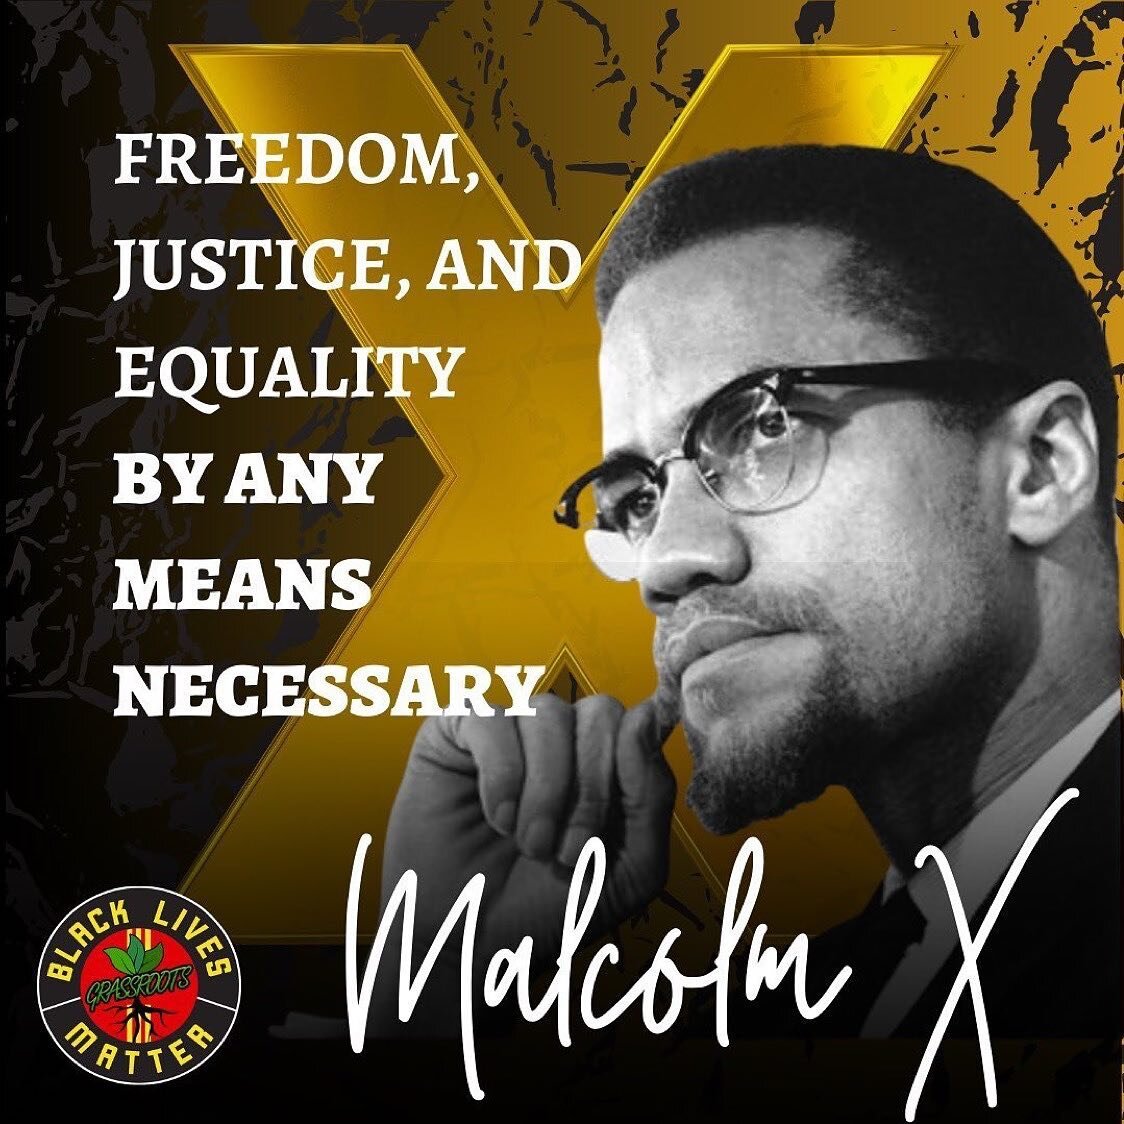 Repost from @blmgrassroots
&bull;
Grateful for the light, wisdom, example, life, and legacy that is El-Hajj Malik El-Shabazz. 
#MalcolmXDay
#MalcolmX